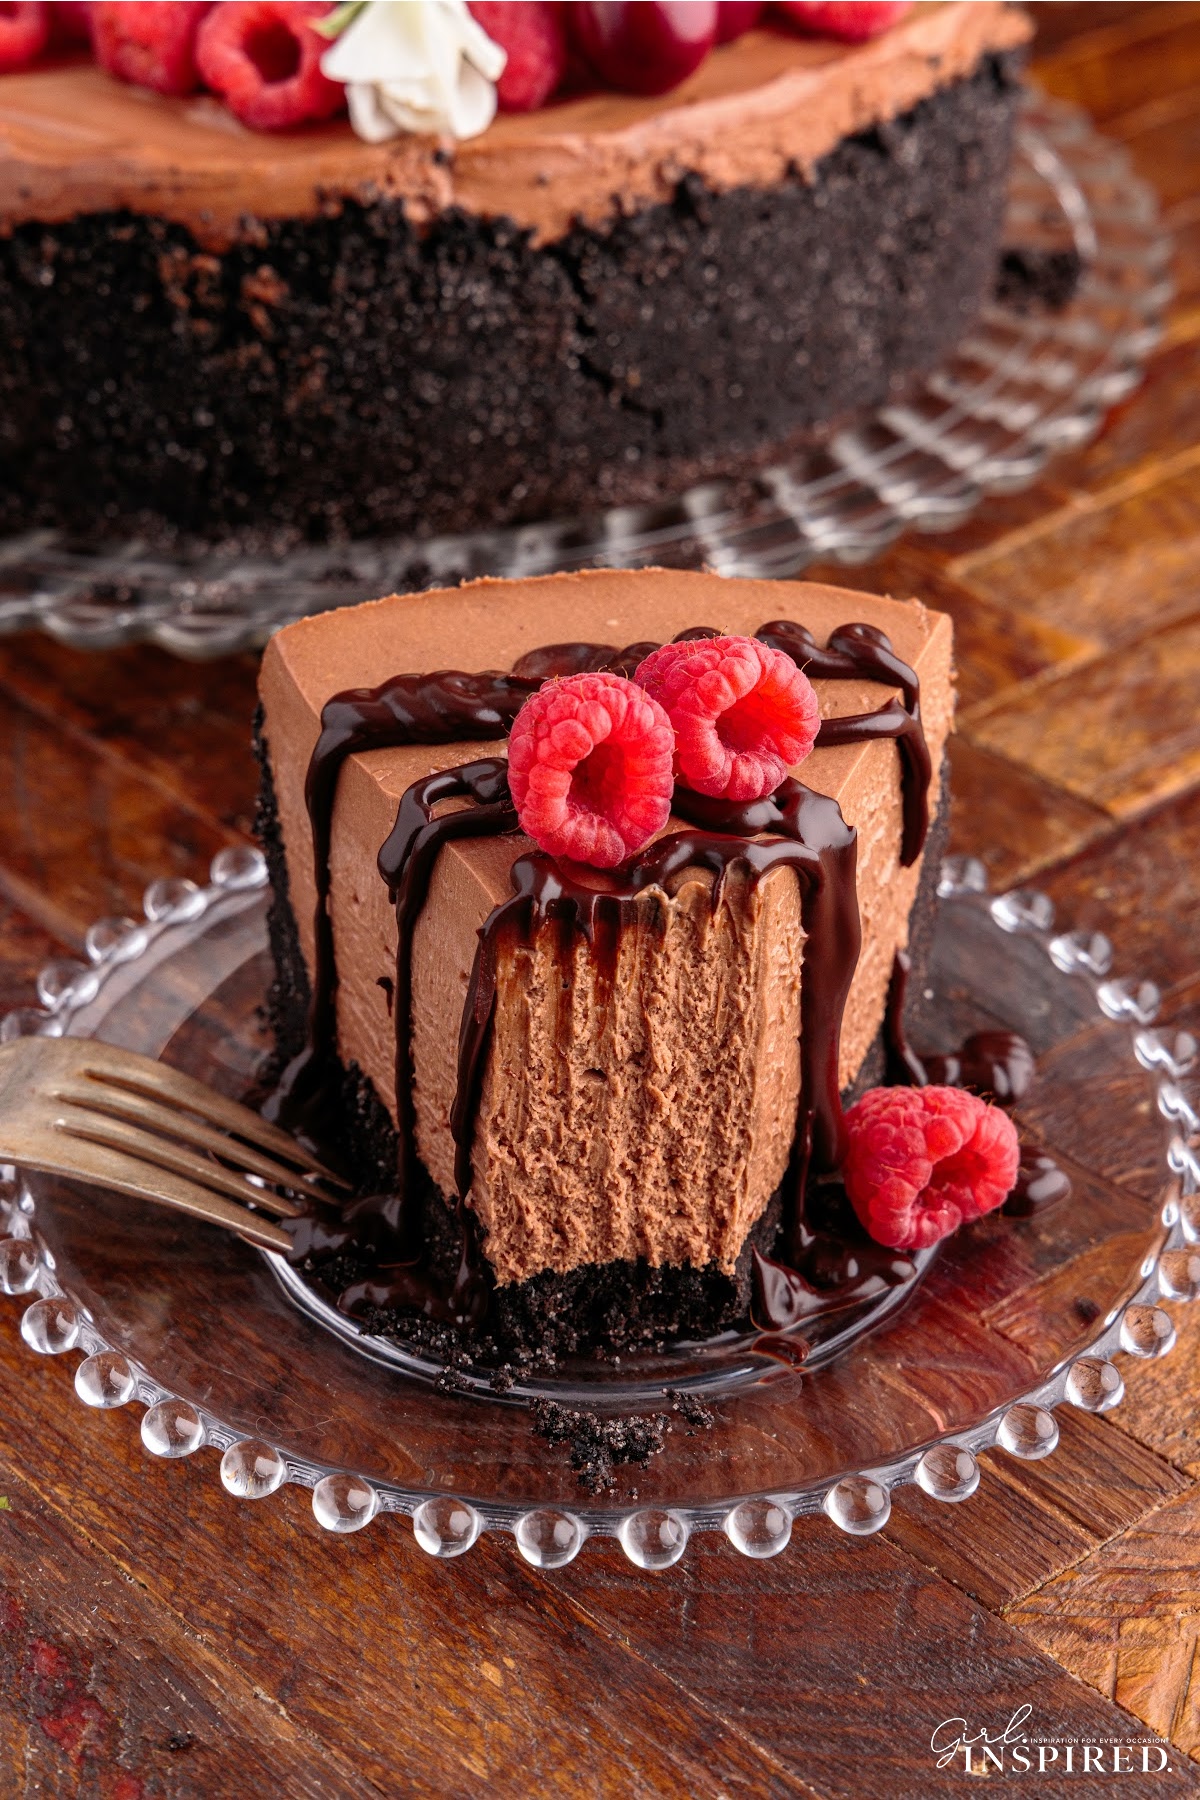 A slice of No Bake Chocolate Cheesecake with a bite missing topped with raspberries.